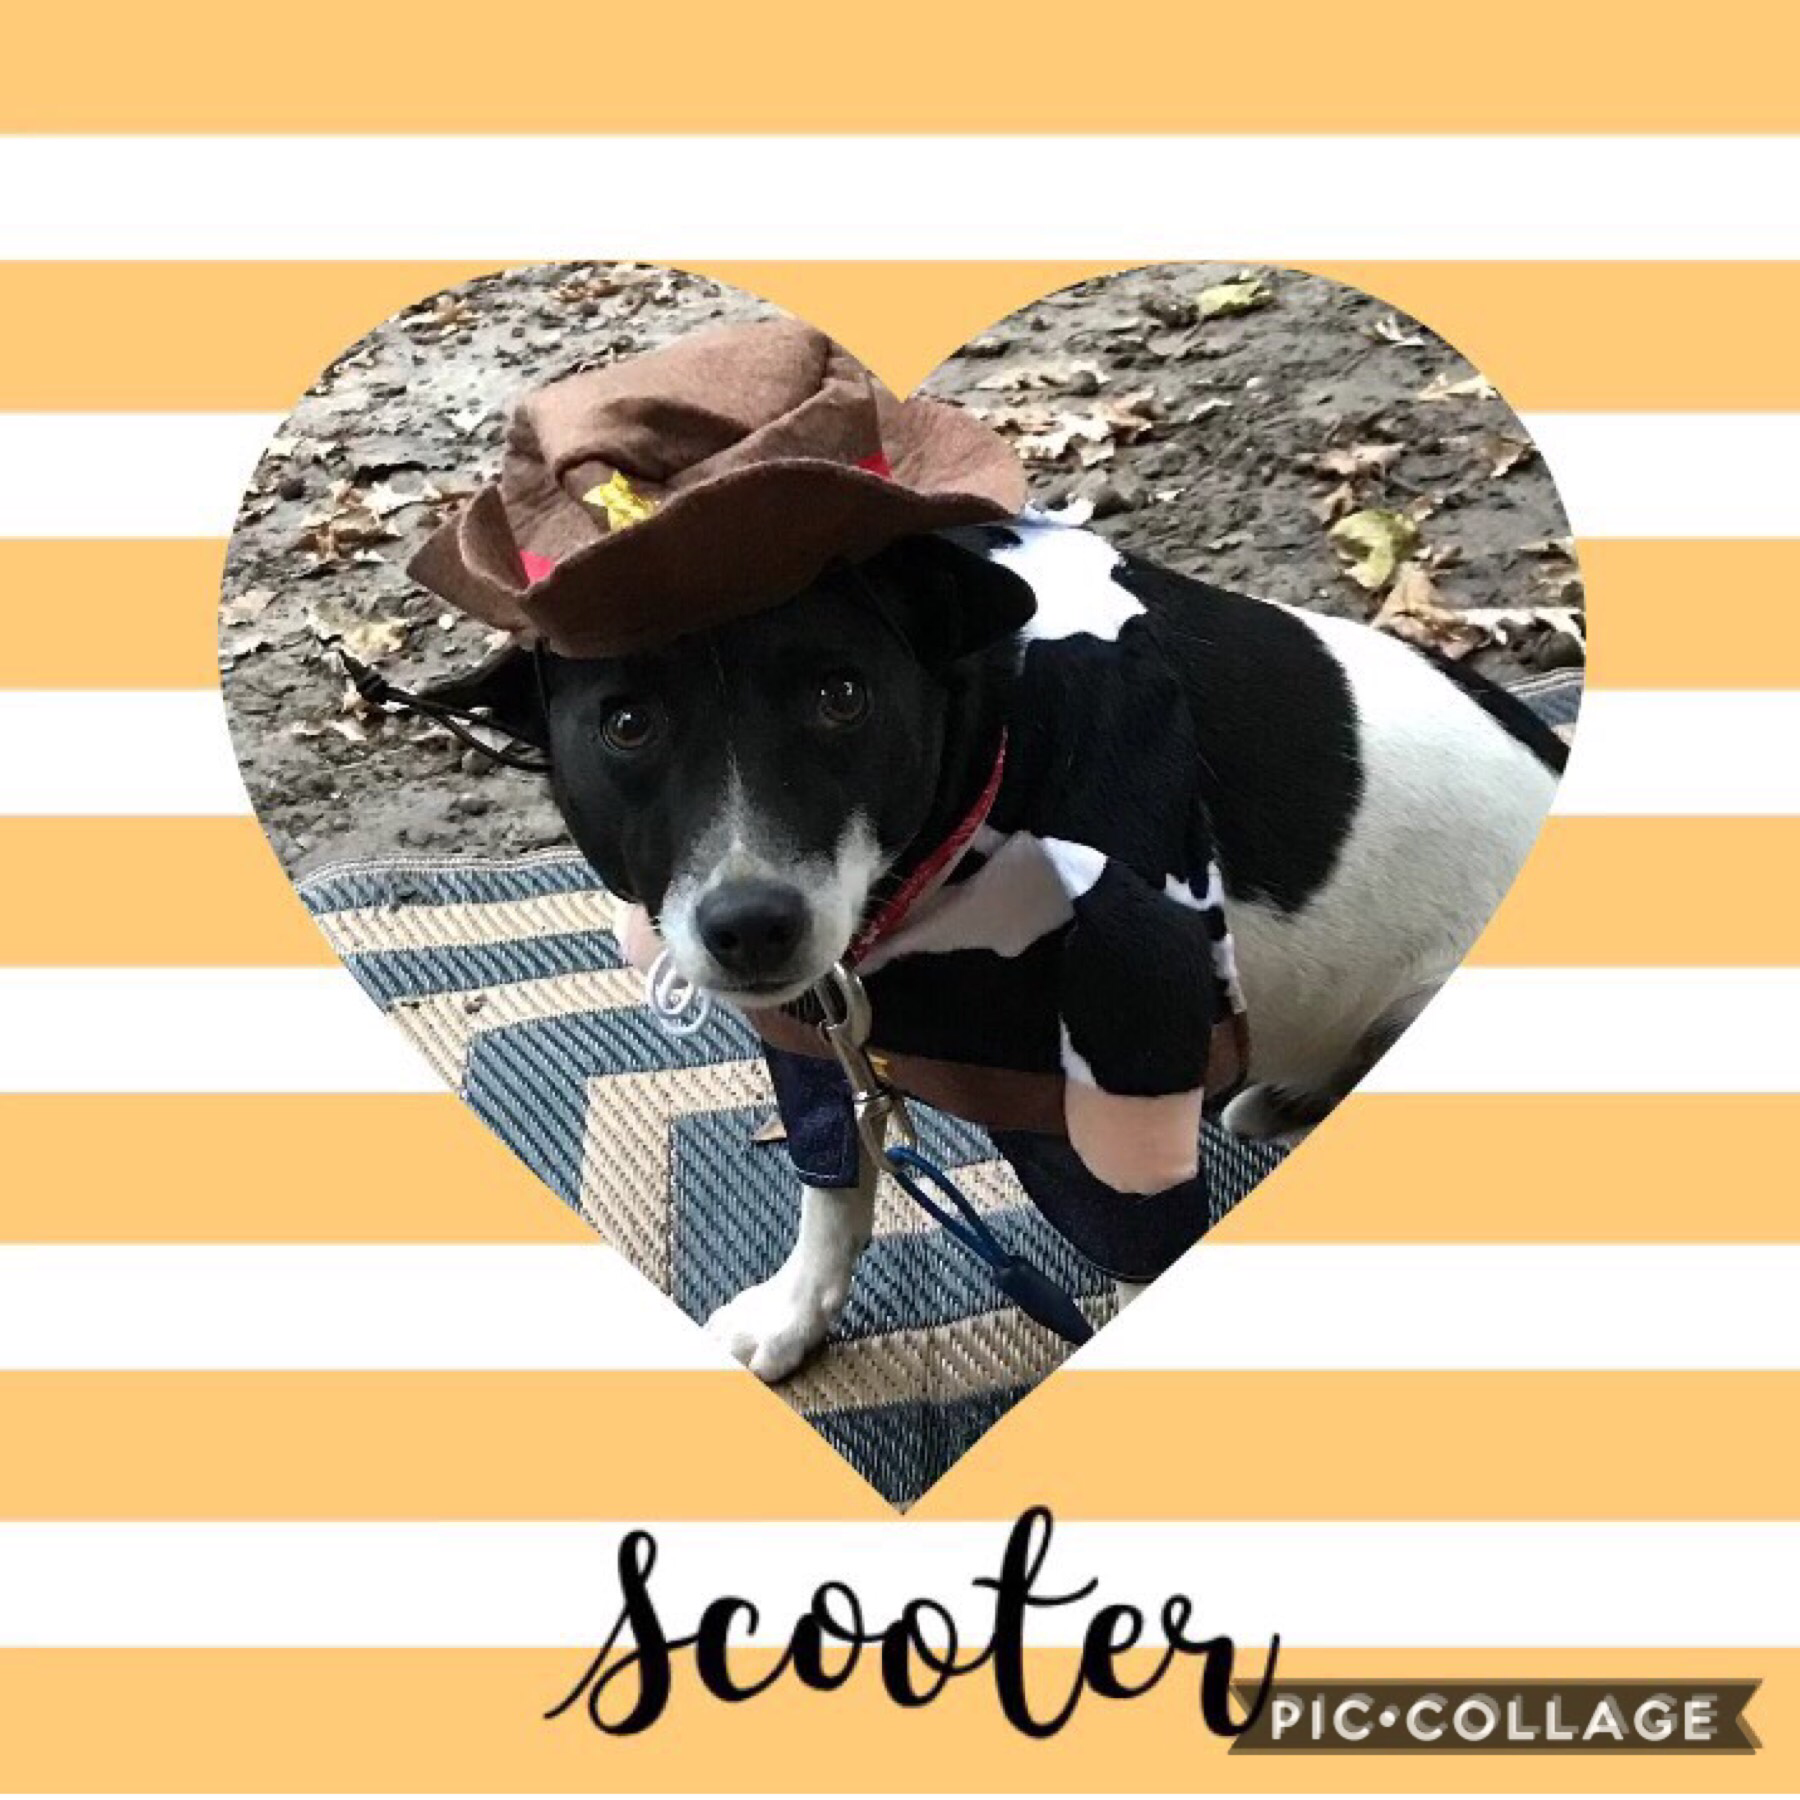 This is my dog and yes his name is Scooter 